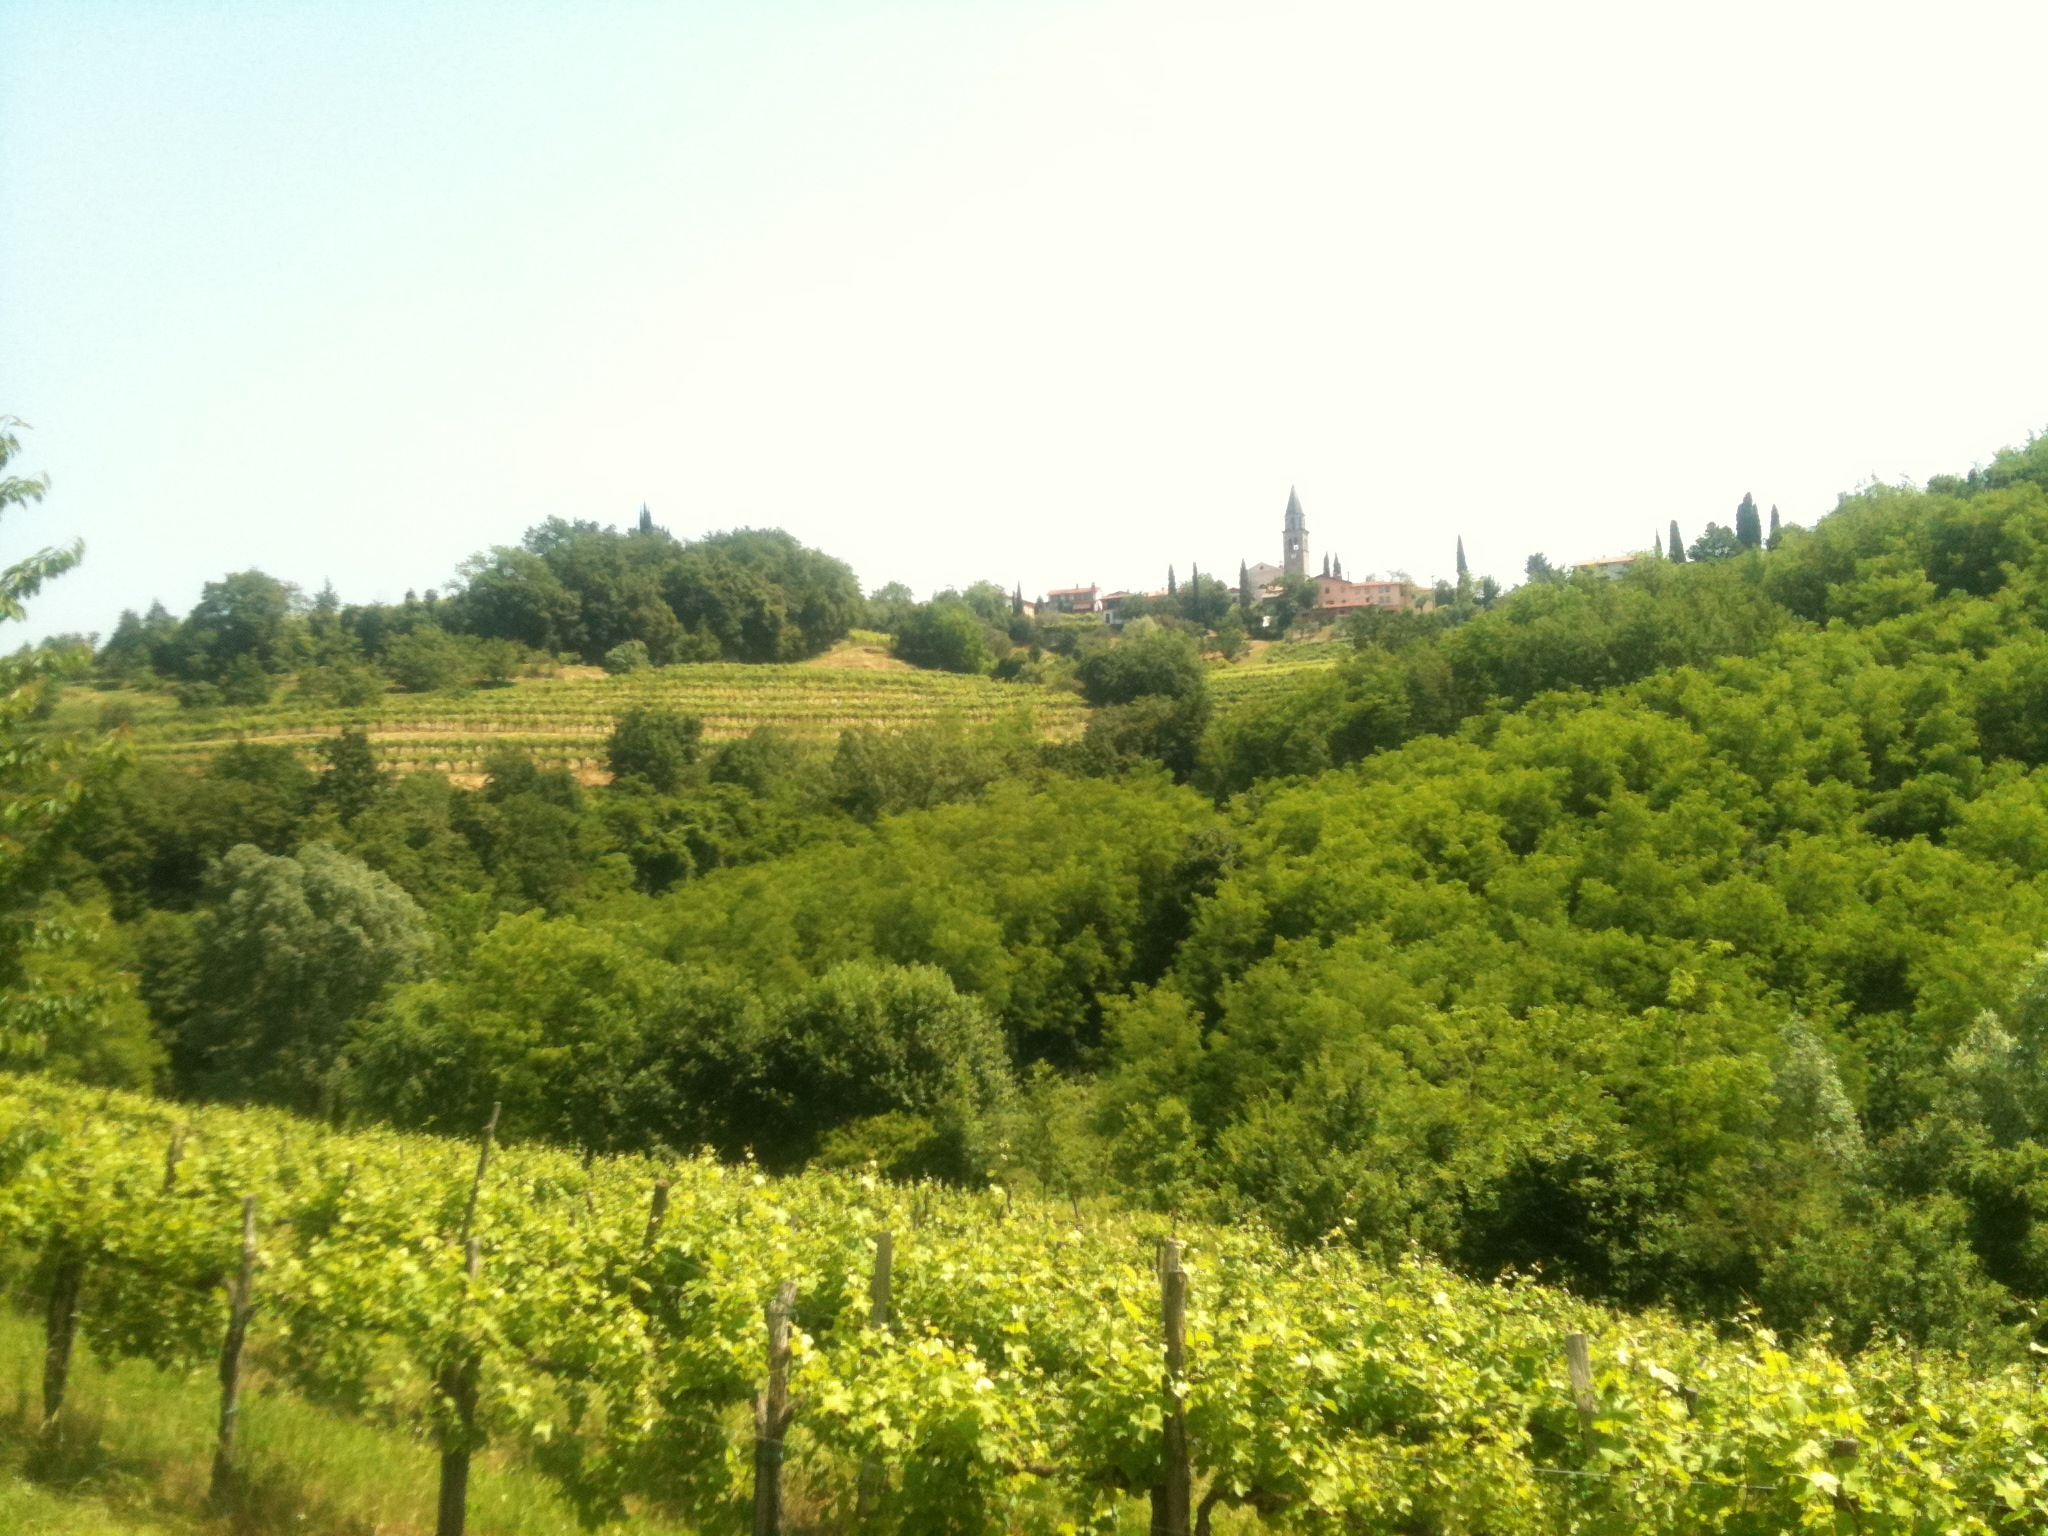 the countryside is surrounded by trees and winerys